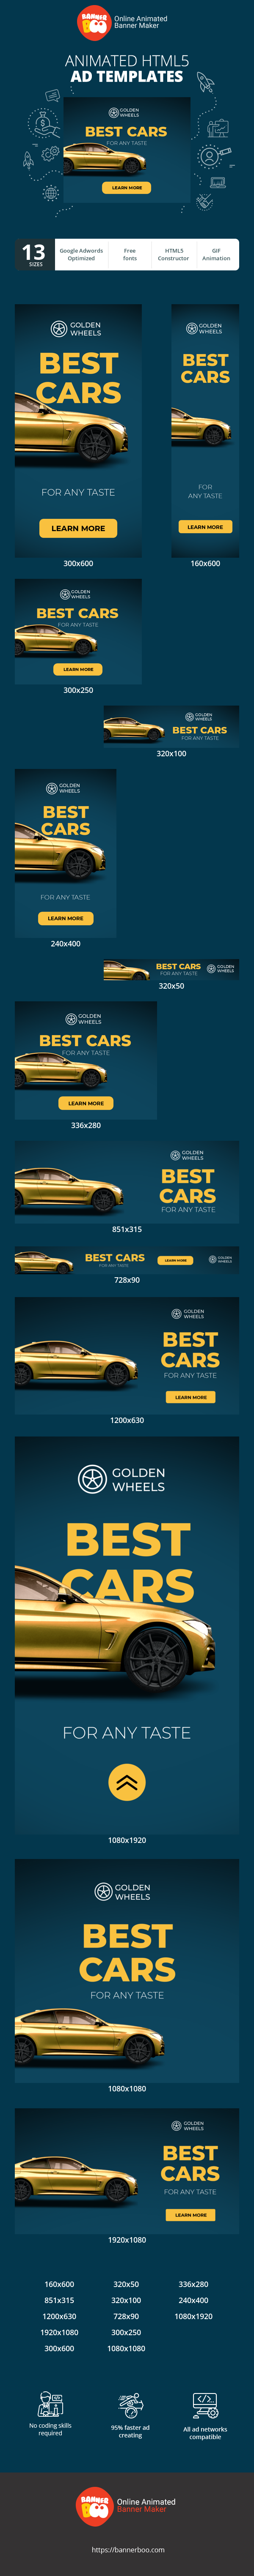 Banner ad template — Best Cars — For Any Taste